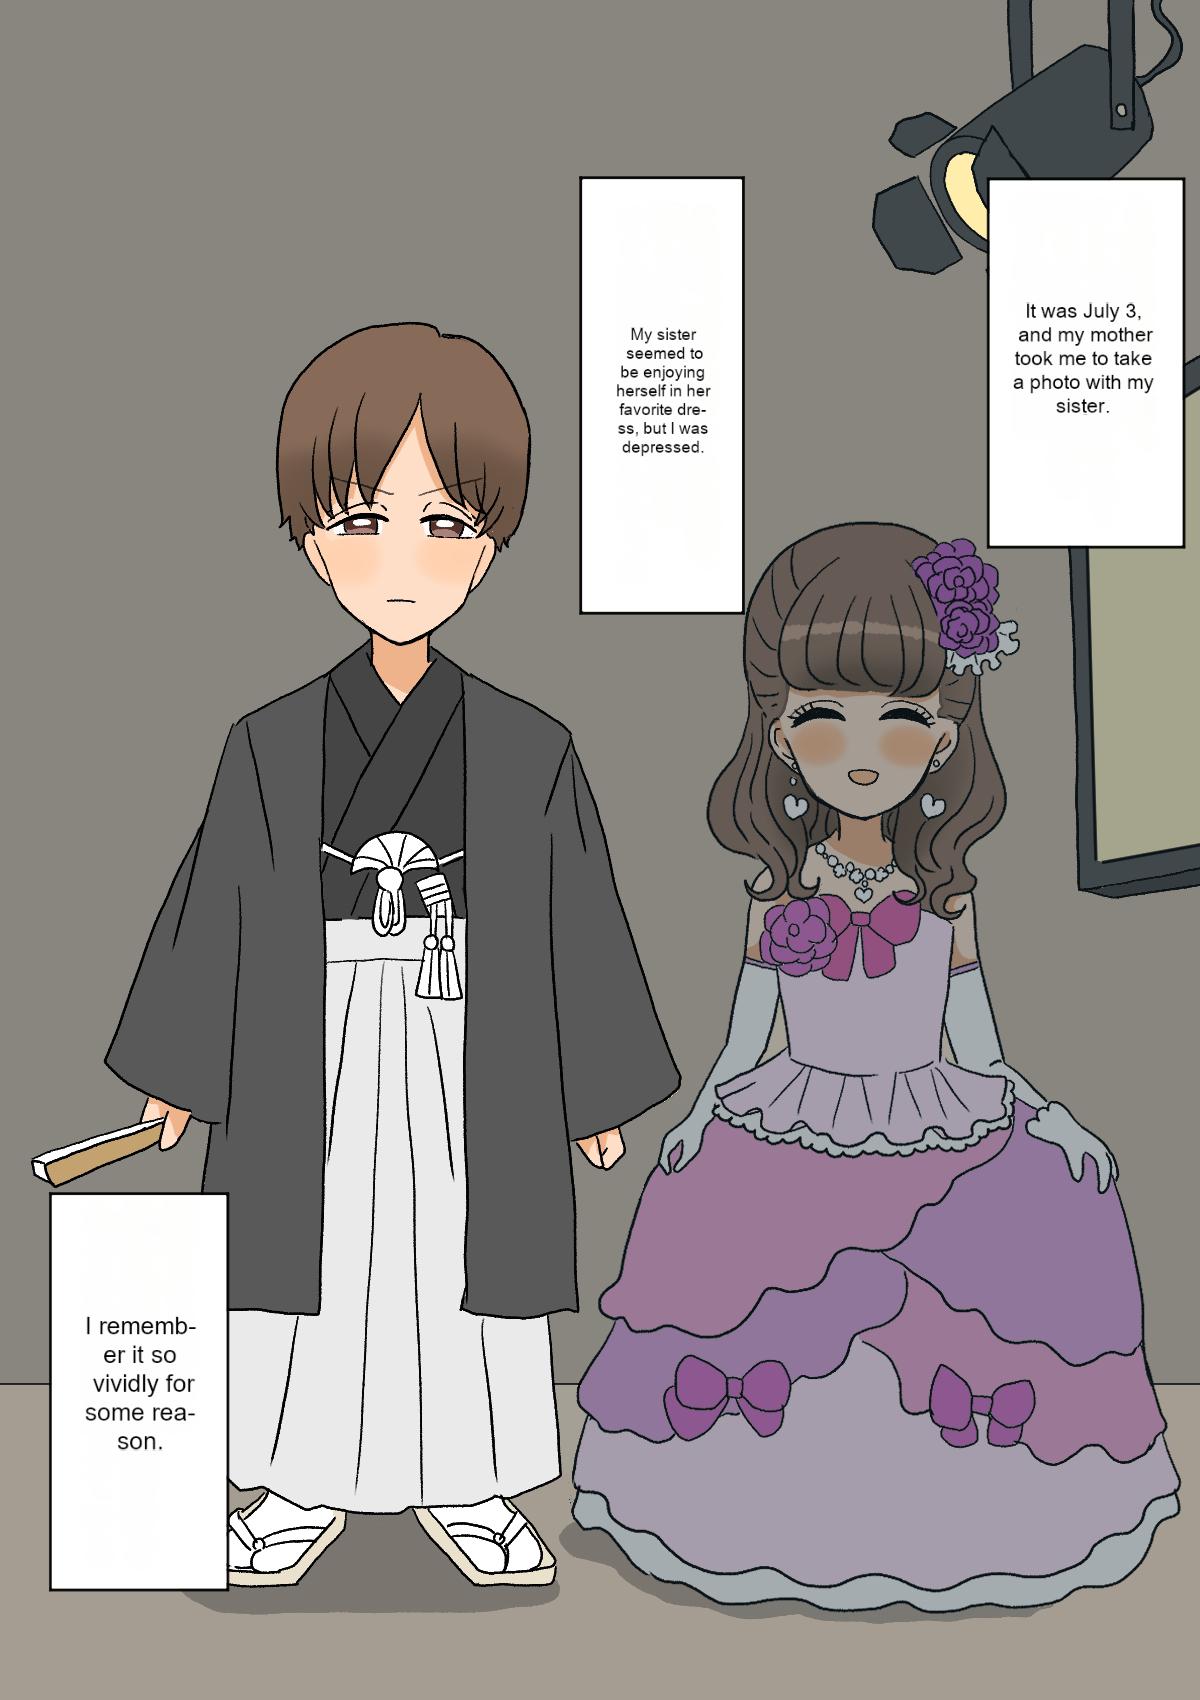 A delinquent boy falls for a female and becomes a cute bride 1